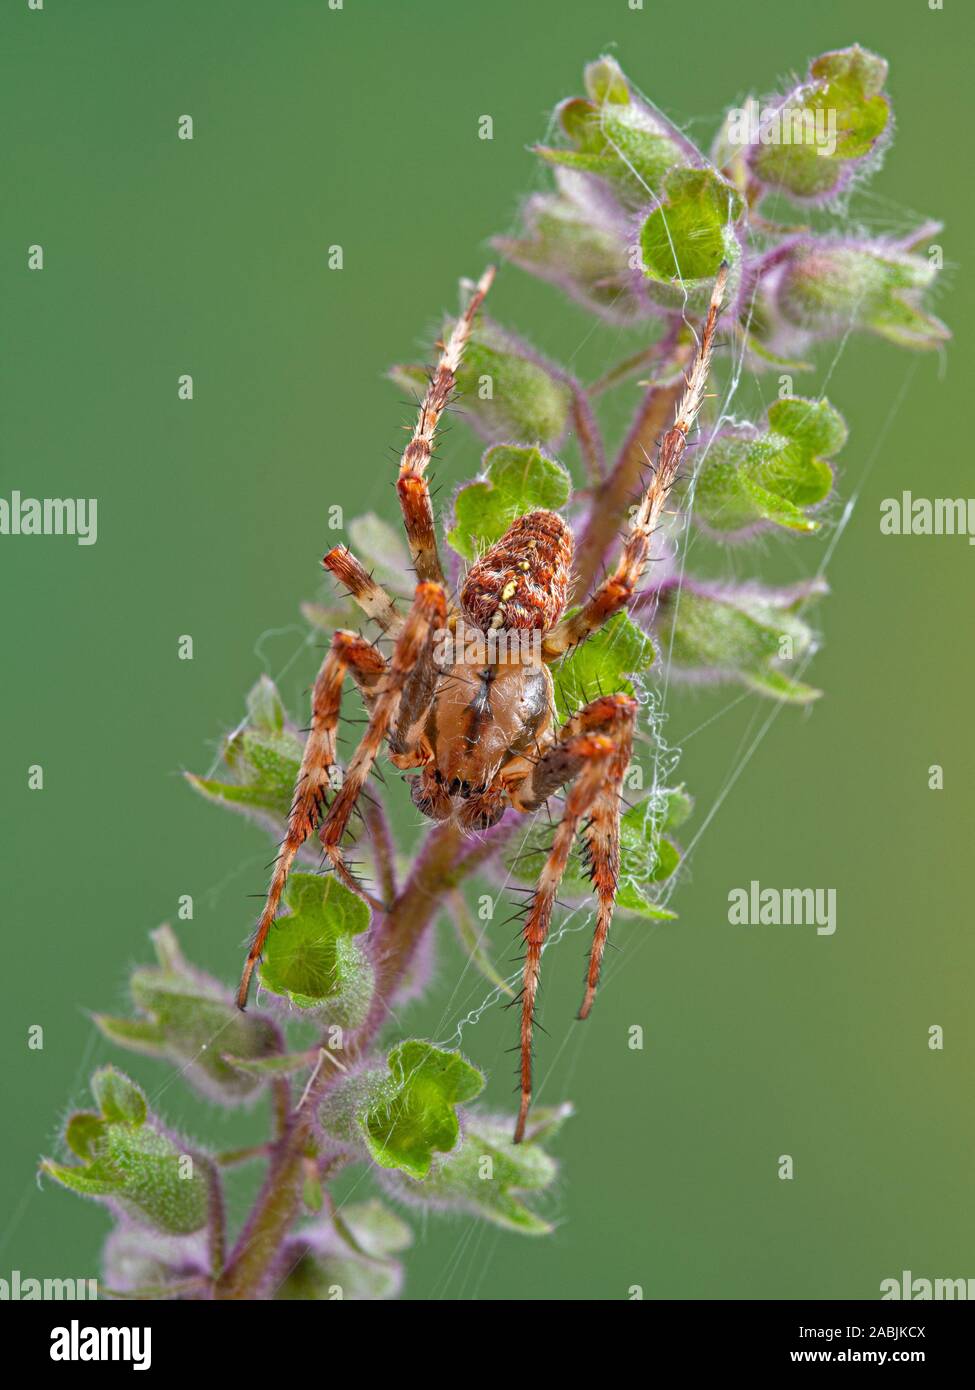 dorsal view of a mature male cross orbweaver spider, Araneus diadematus, resting on a flower. This European species has been introduced throughout Nor Stock Photo